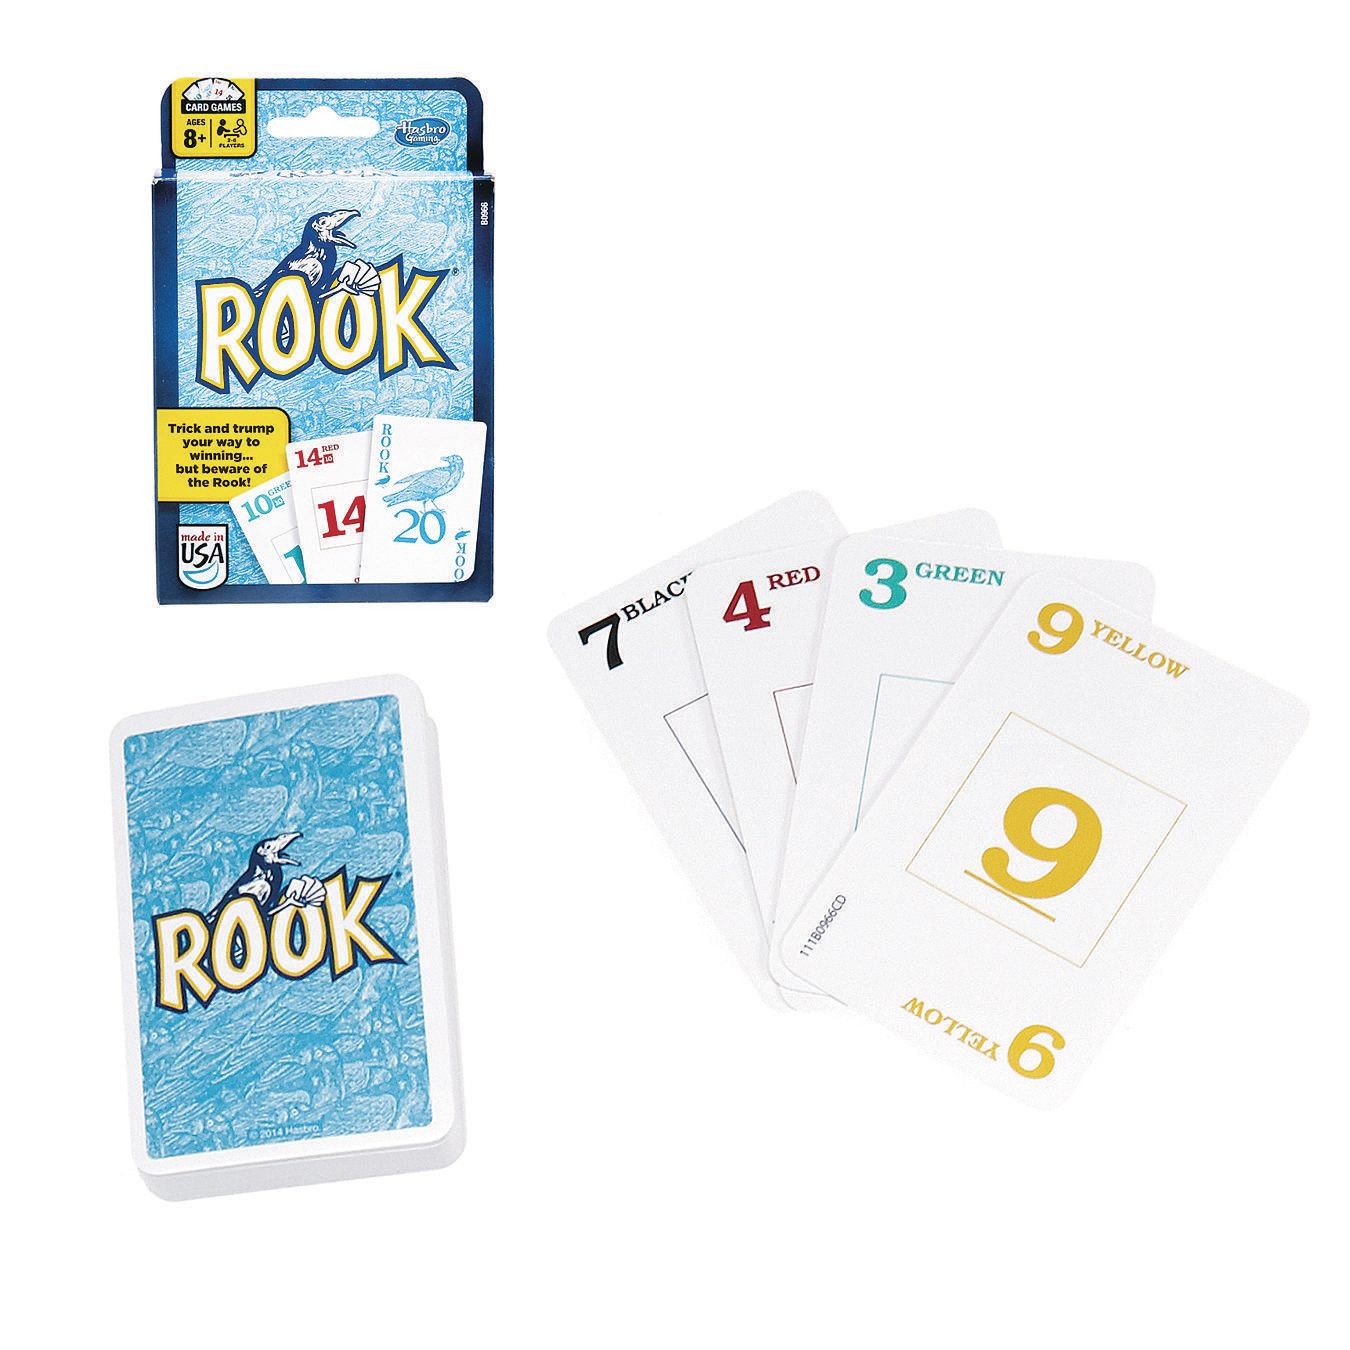 New Rook Card Game Fast Ship Hasbro